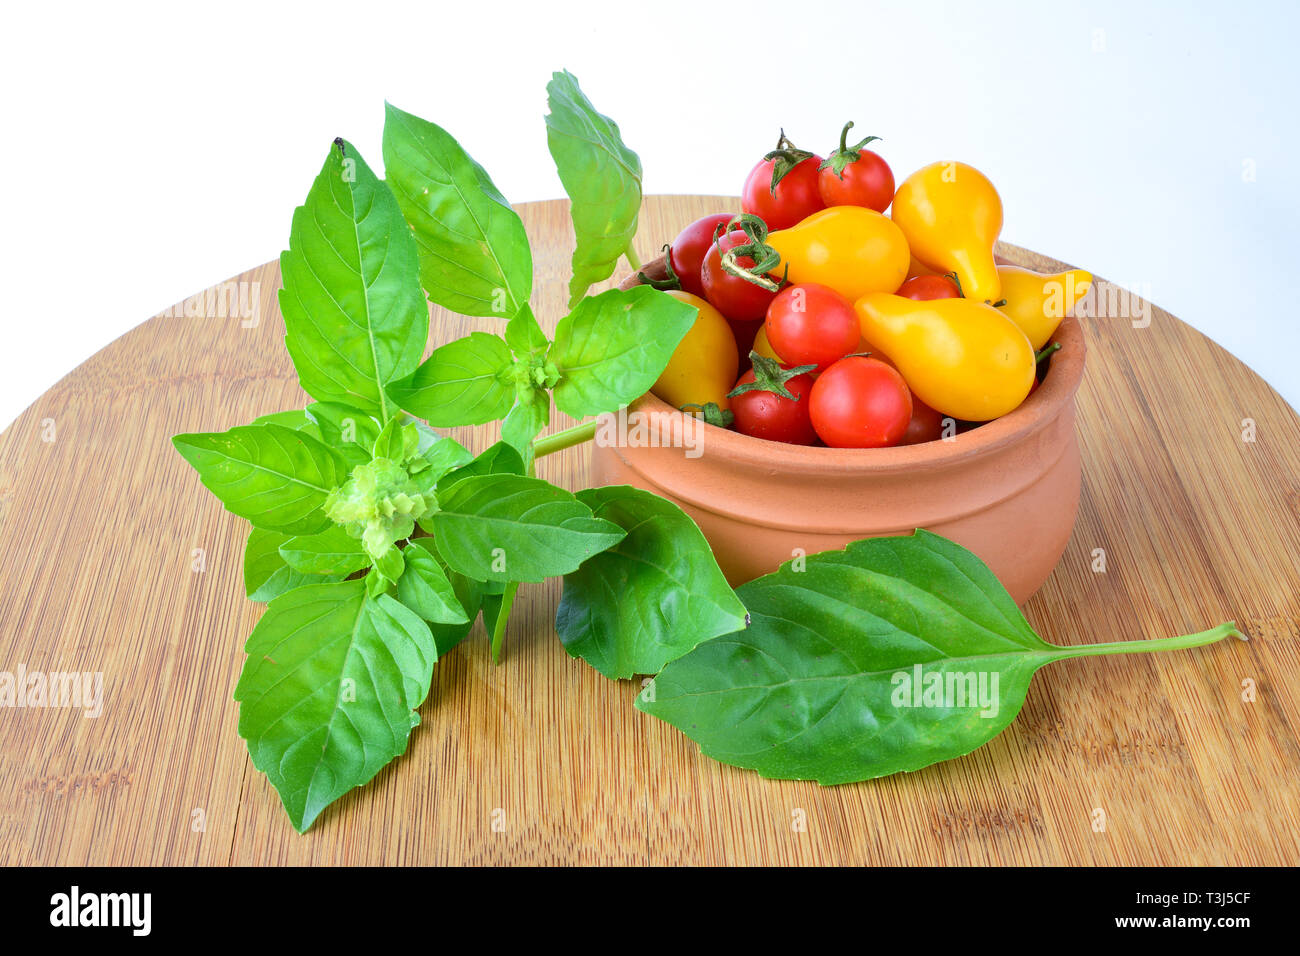 Green fresh aromatic basil and red and yellow cherry tomato in a clay pot on wooden bamboo chopping board over white Stock Photo